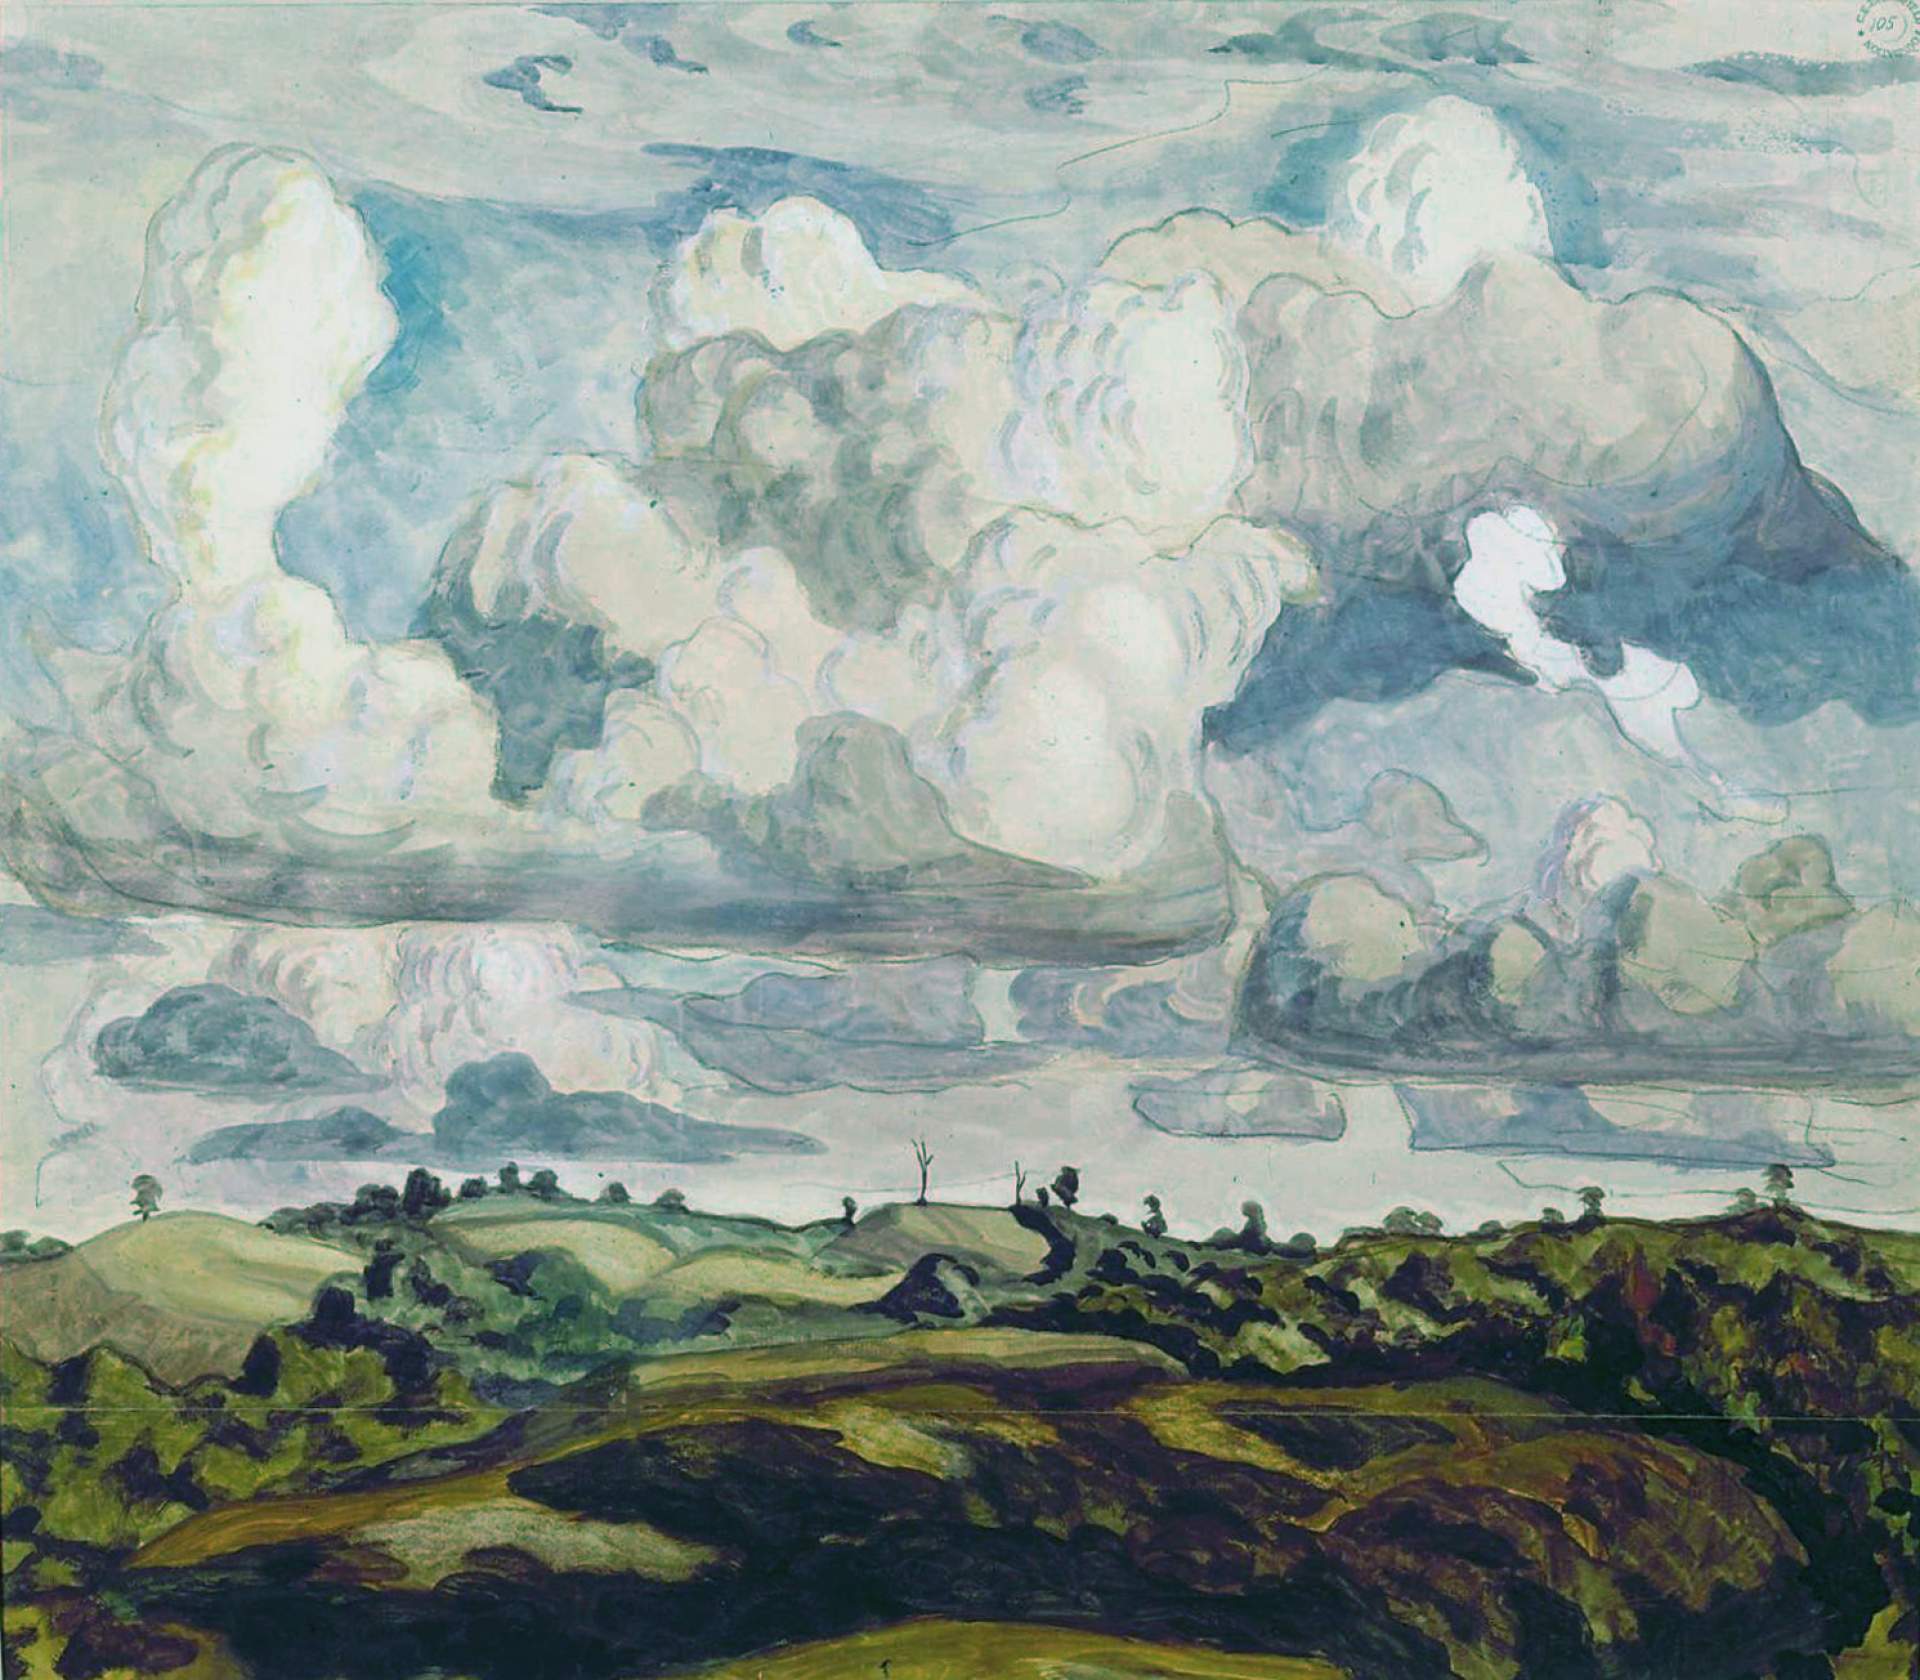 Landscape with Hills and Clouds